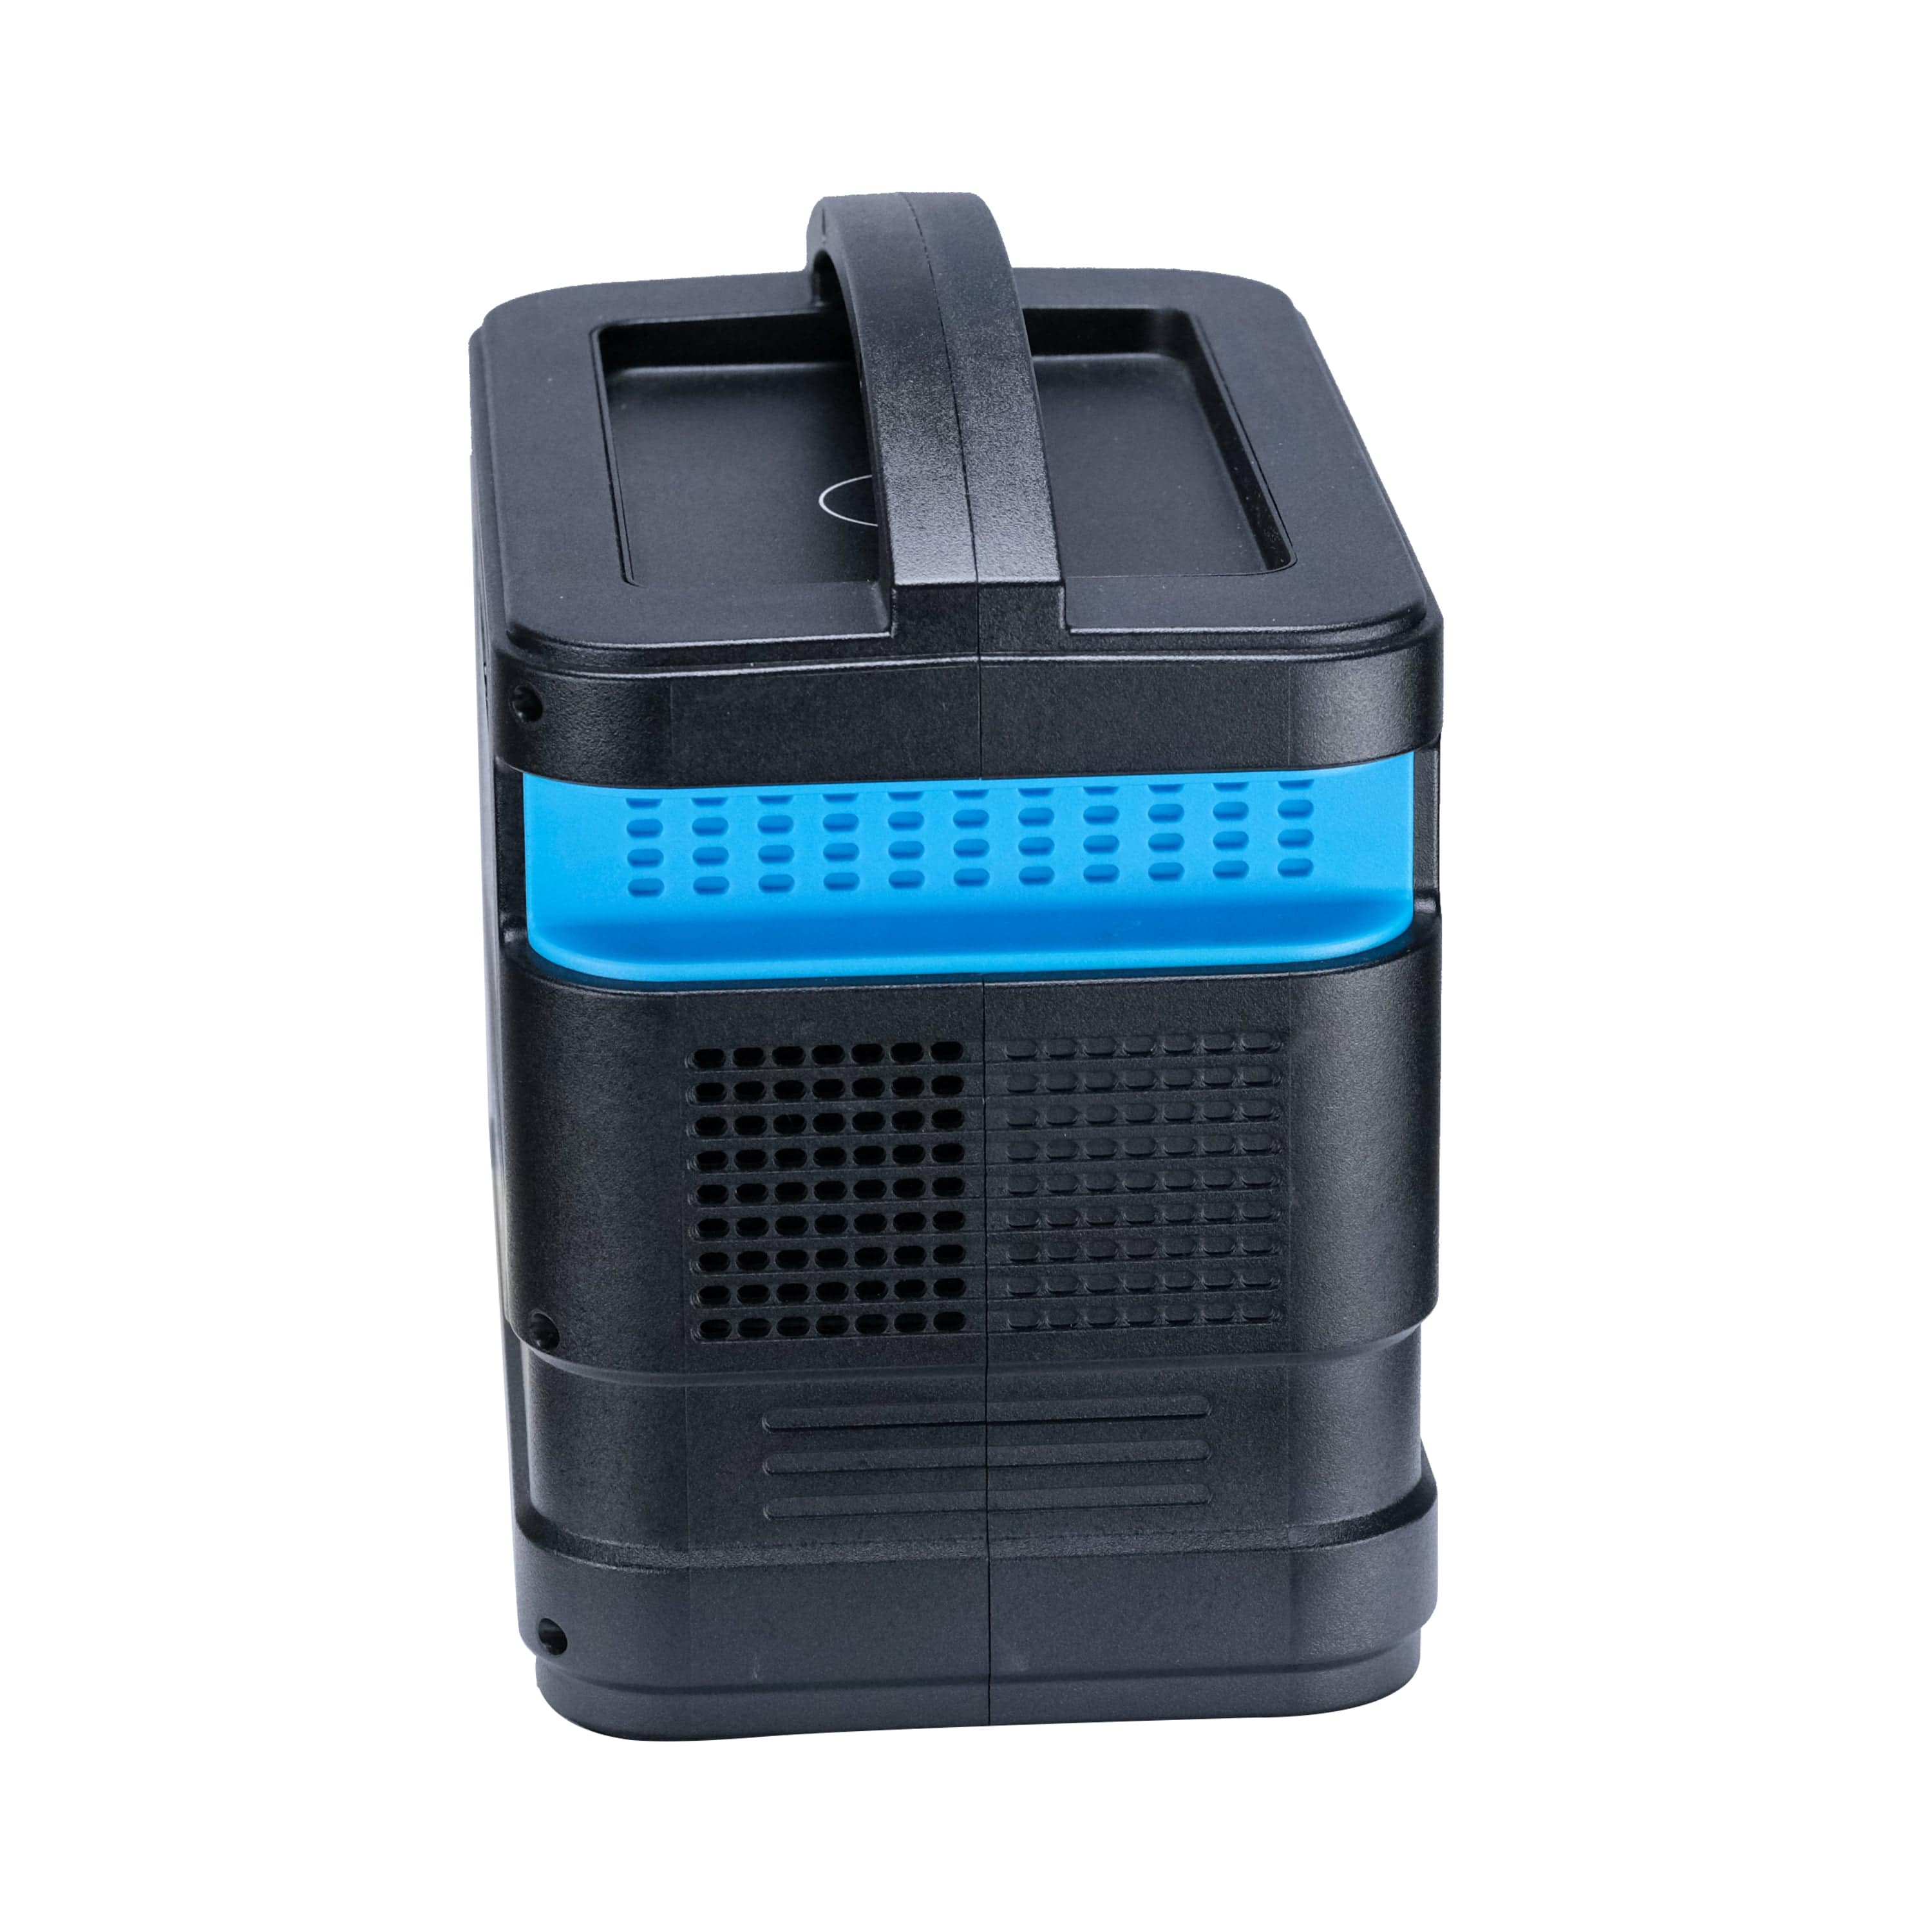 Pulsar power station Pulsar PPS500 500 Watt Lithium-Ion Portable Power Station with LCD Display and Wireless Charging Pad